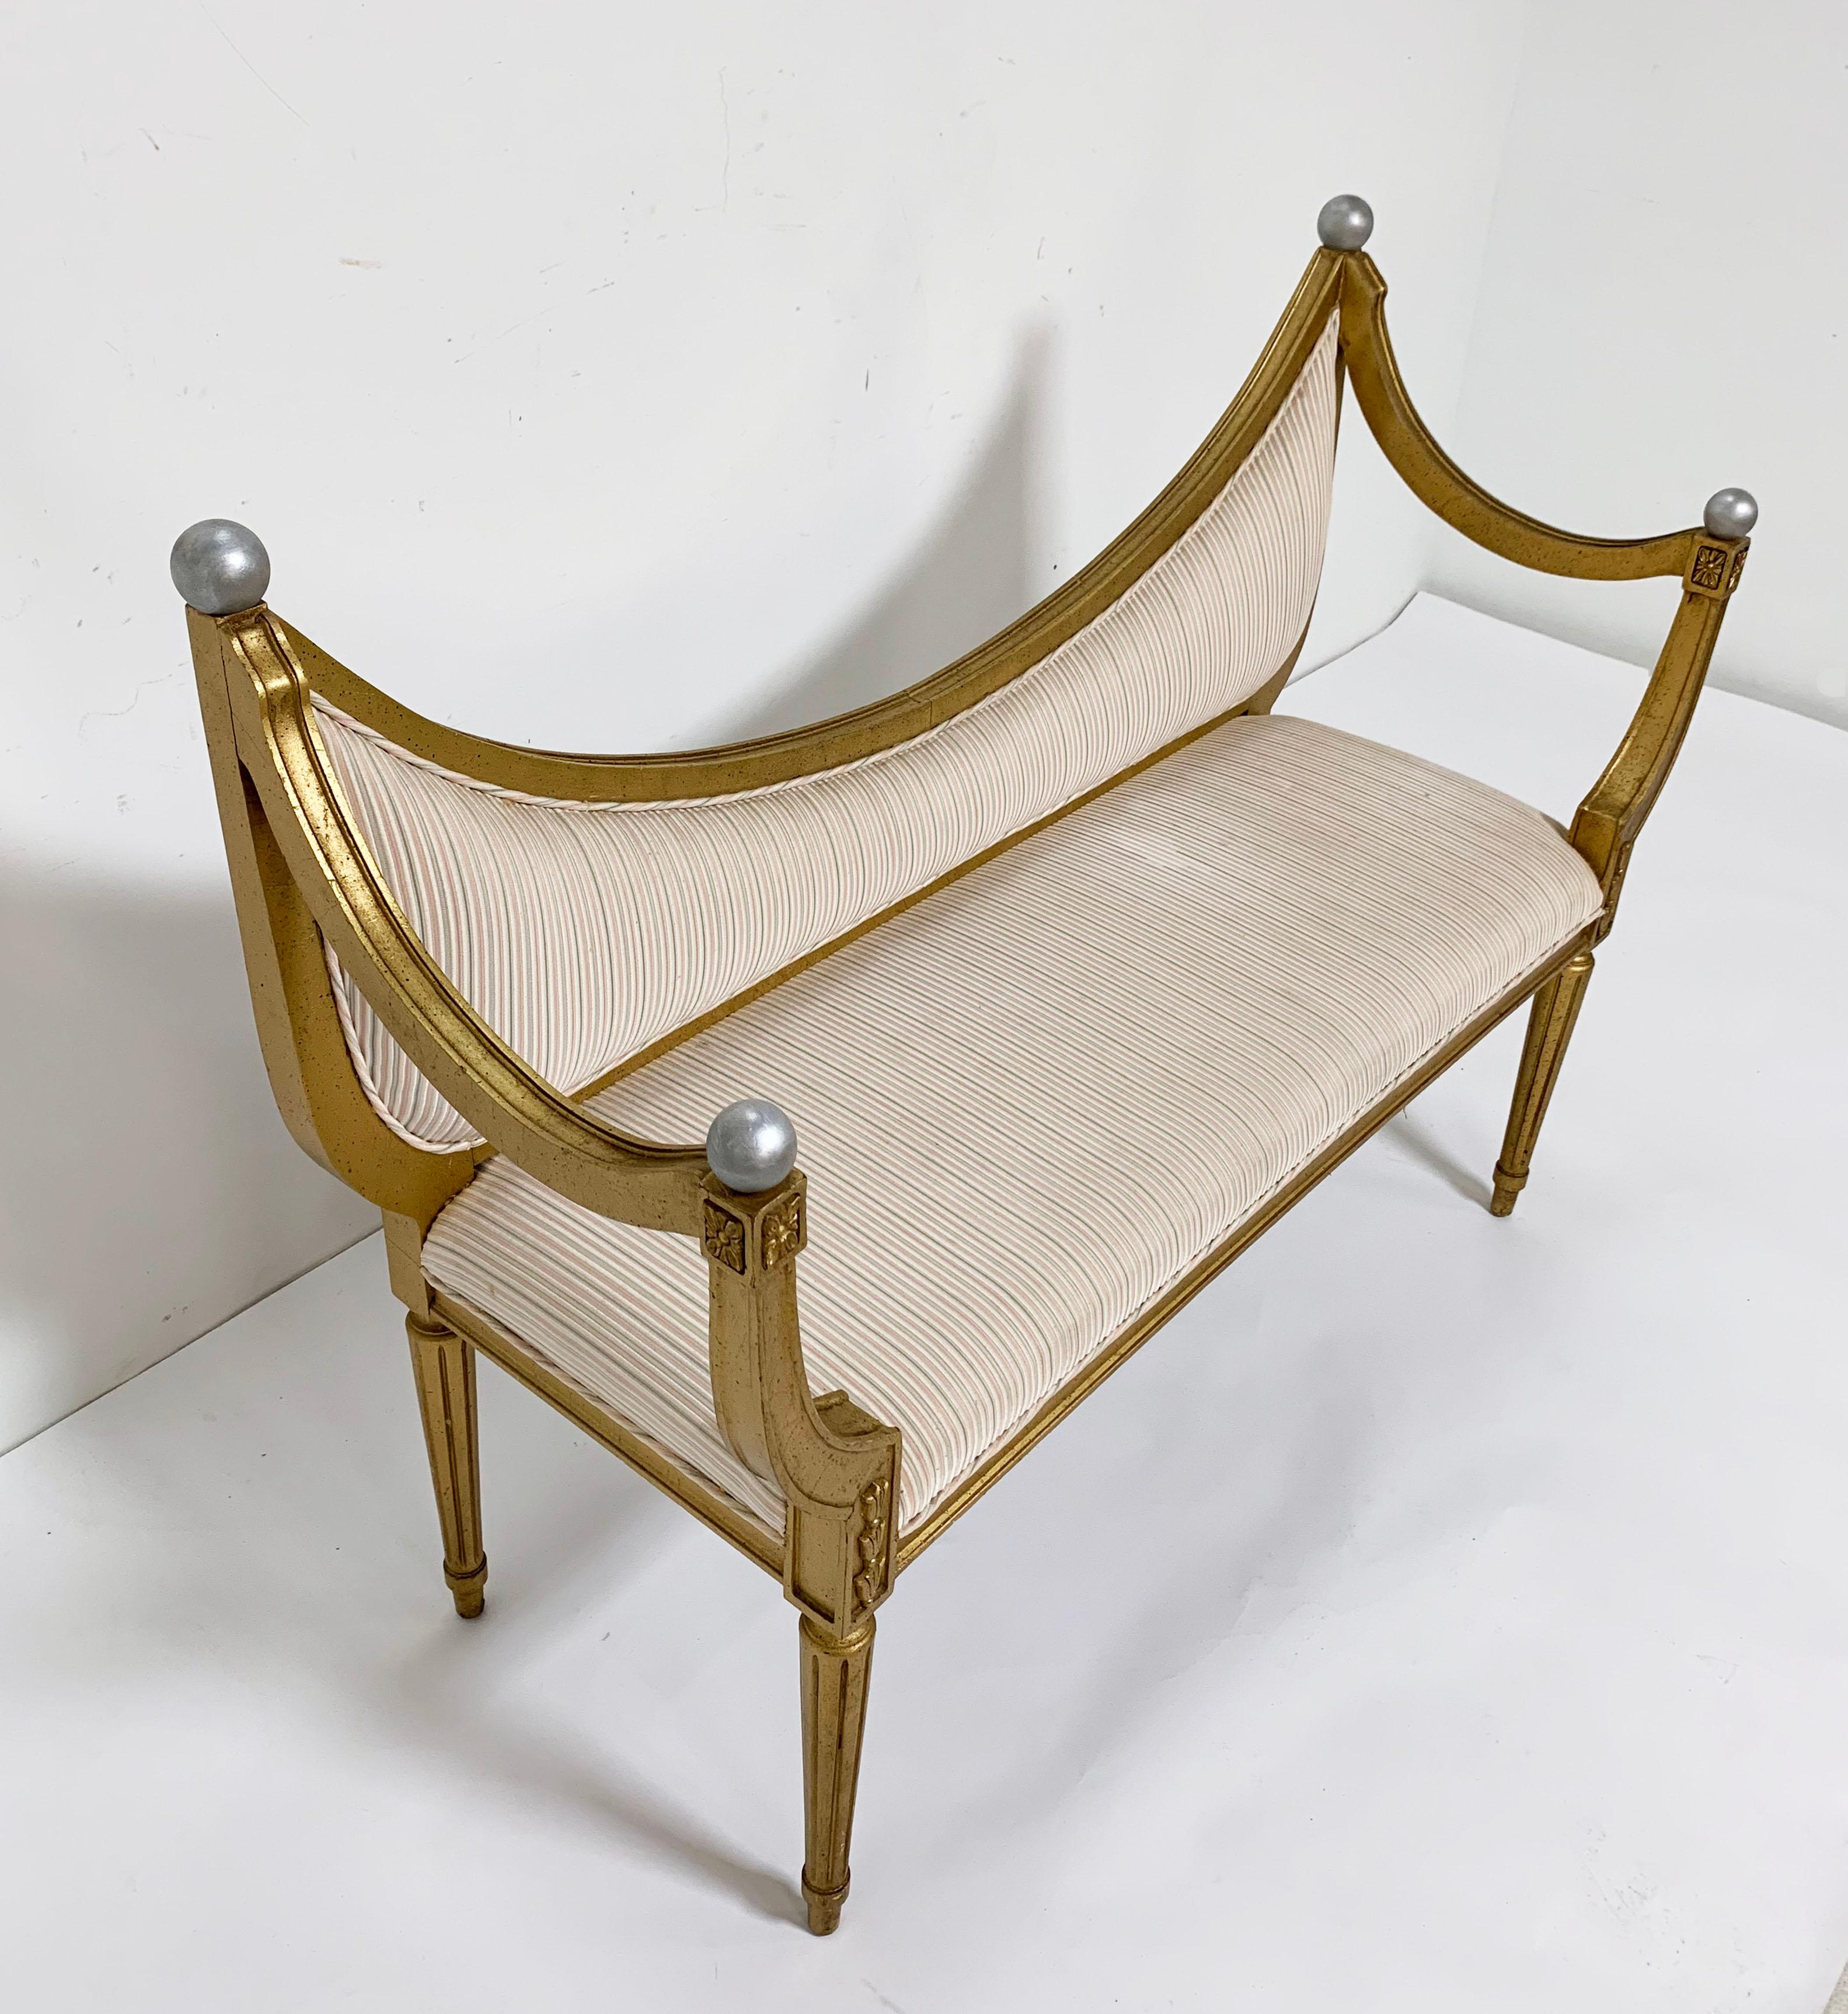 Mid-20th Century Midcentury Giltwood Settee Bench in the Neoclassical Style, circa 1960s